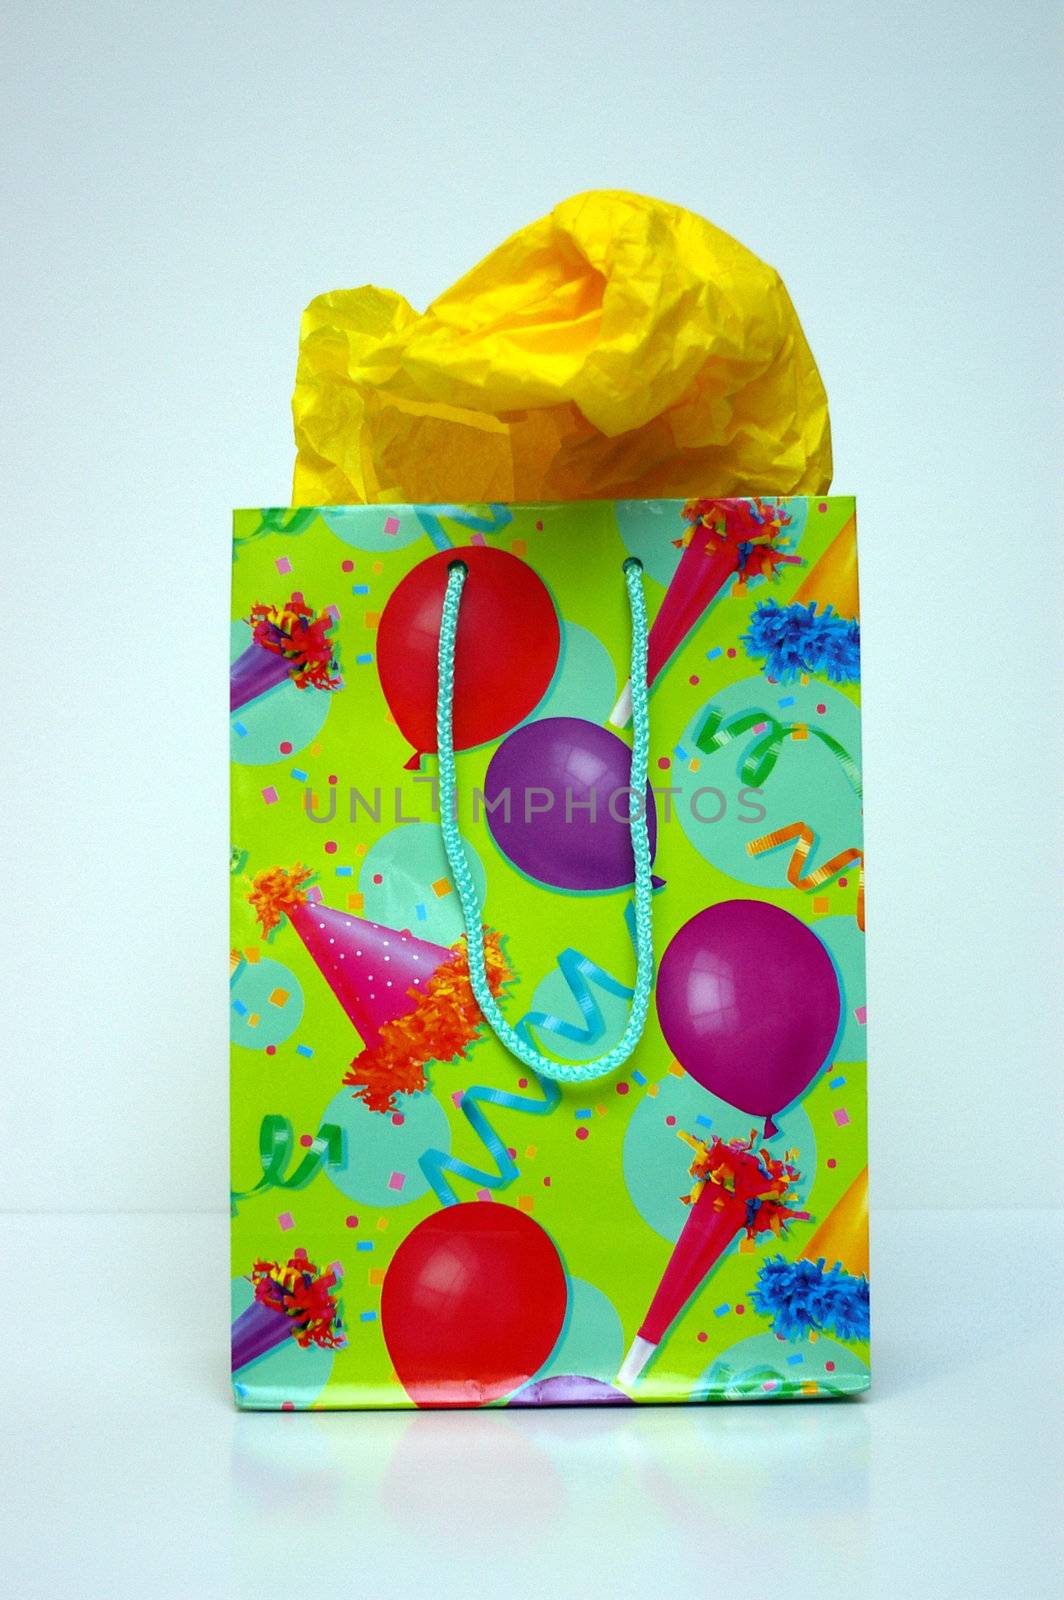 A gift bag for celebrations, Christmas or birthday gifts with tissue paper sticking out.